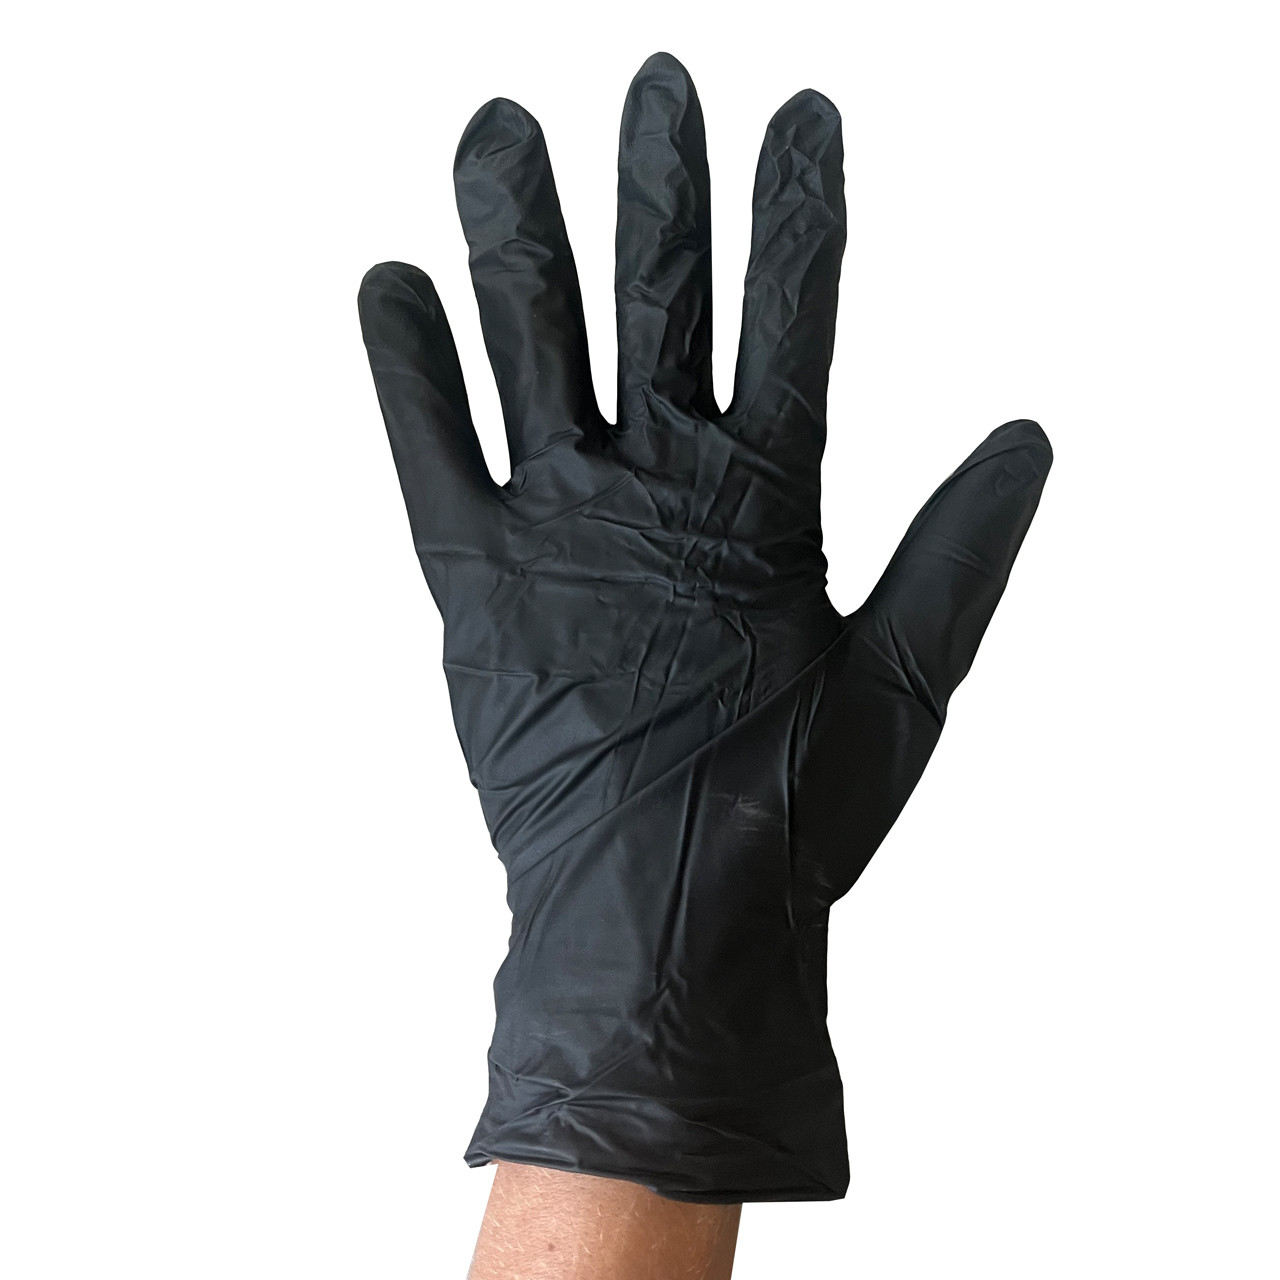 https://cdn11.bigcommerce.com/s-2c9am5e92r/images/stencil/1280x1280/products/9305/6438/GPNB441S---GlovePlus-Black-Nitrile-Gloves-100---hand-inside-3---lores__61546.1695059849.jpg?c=2